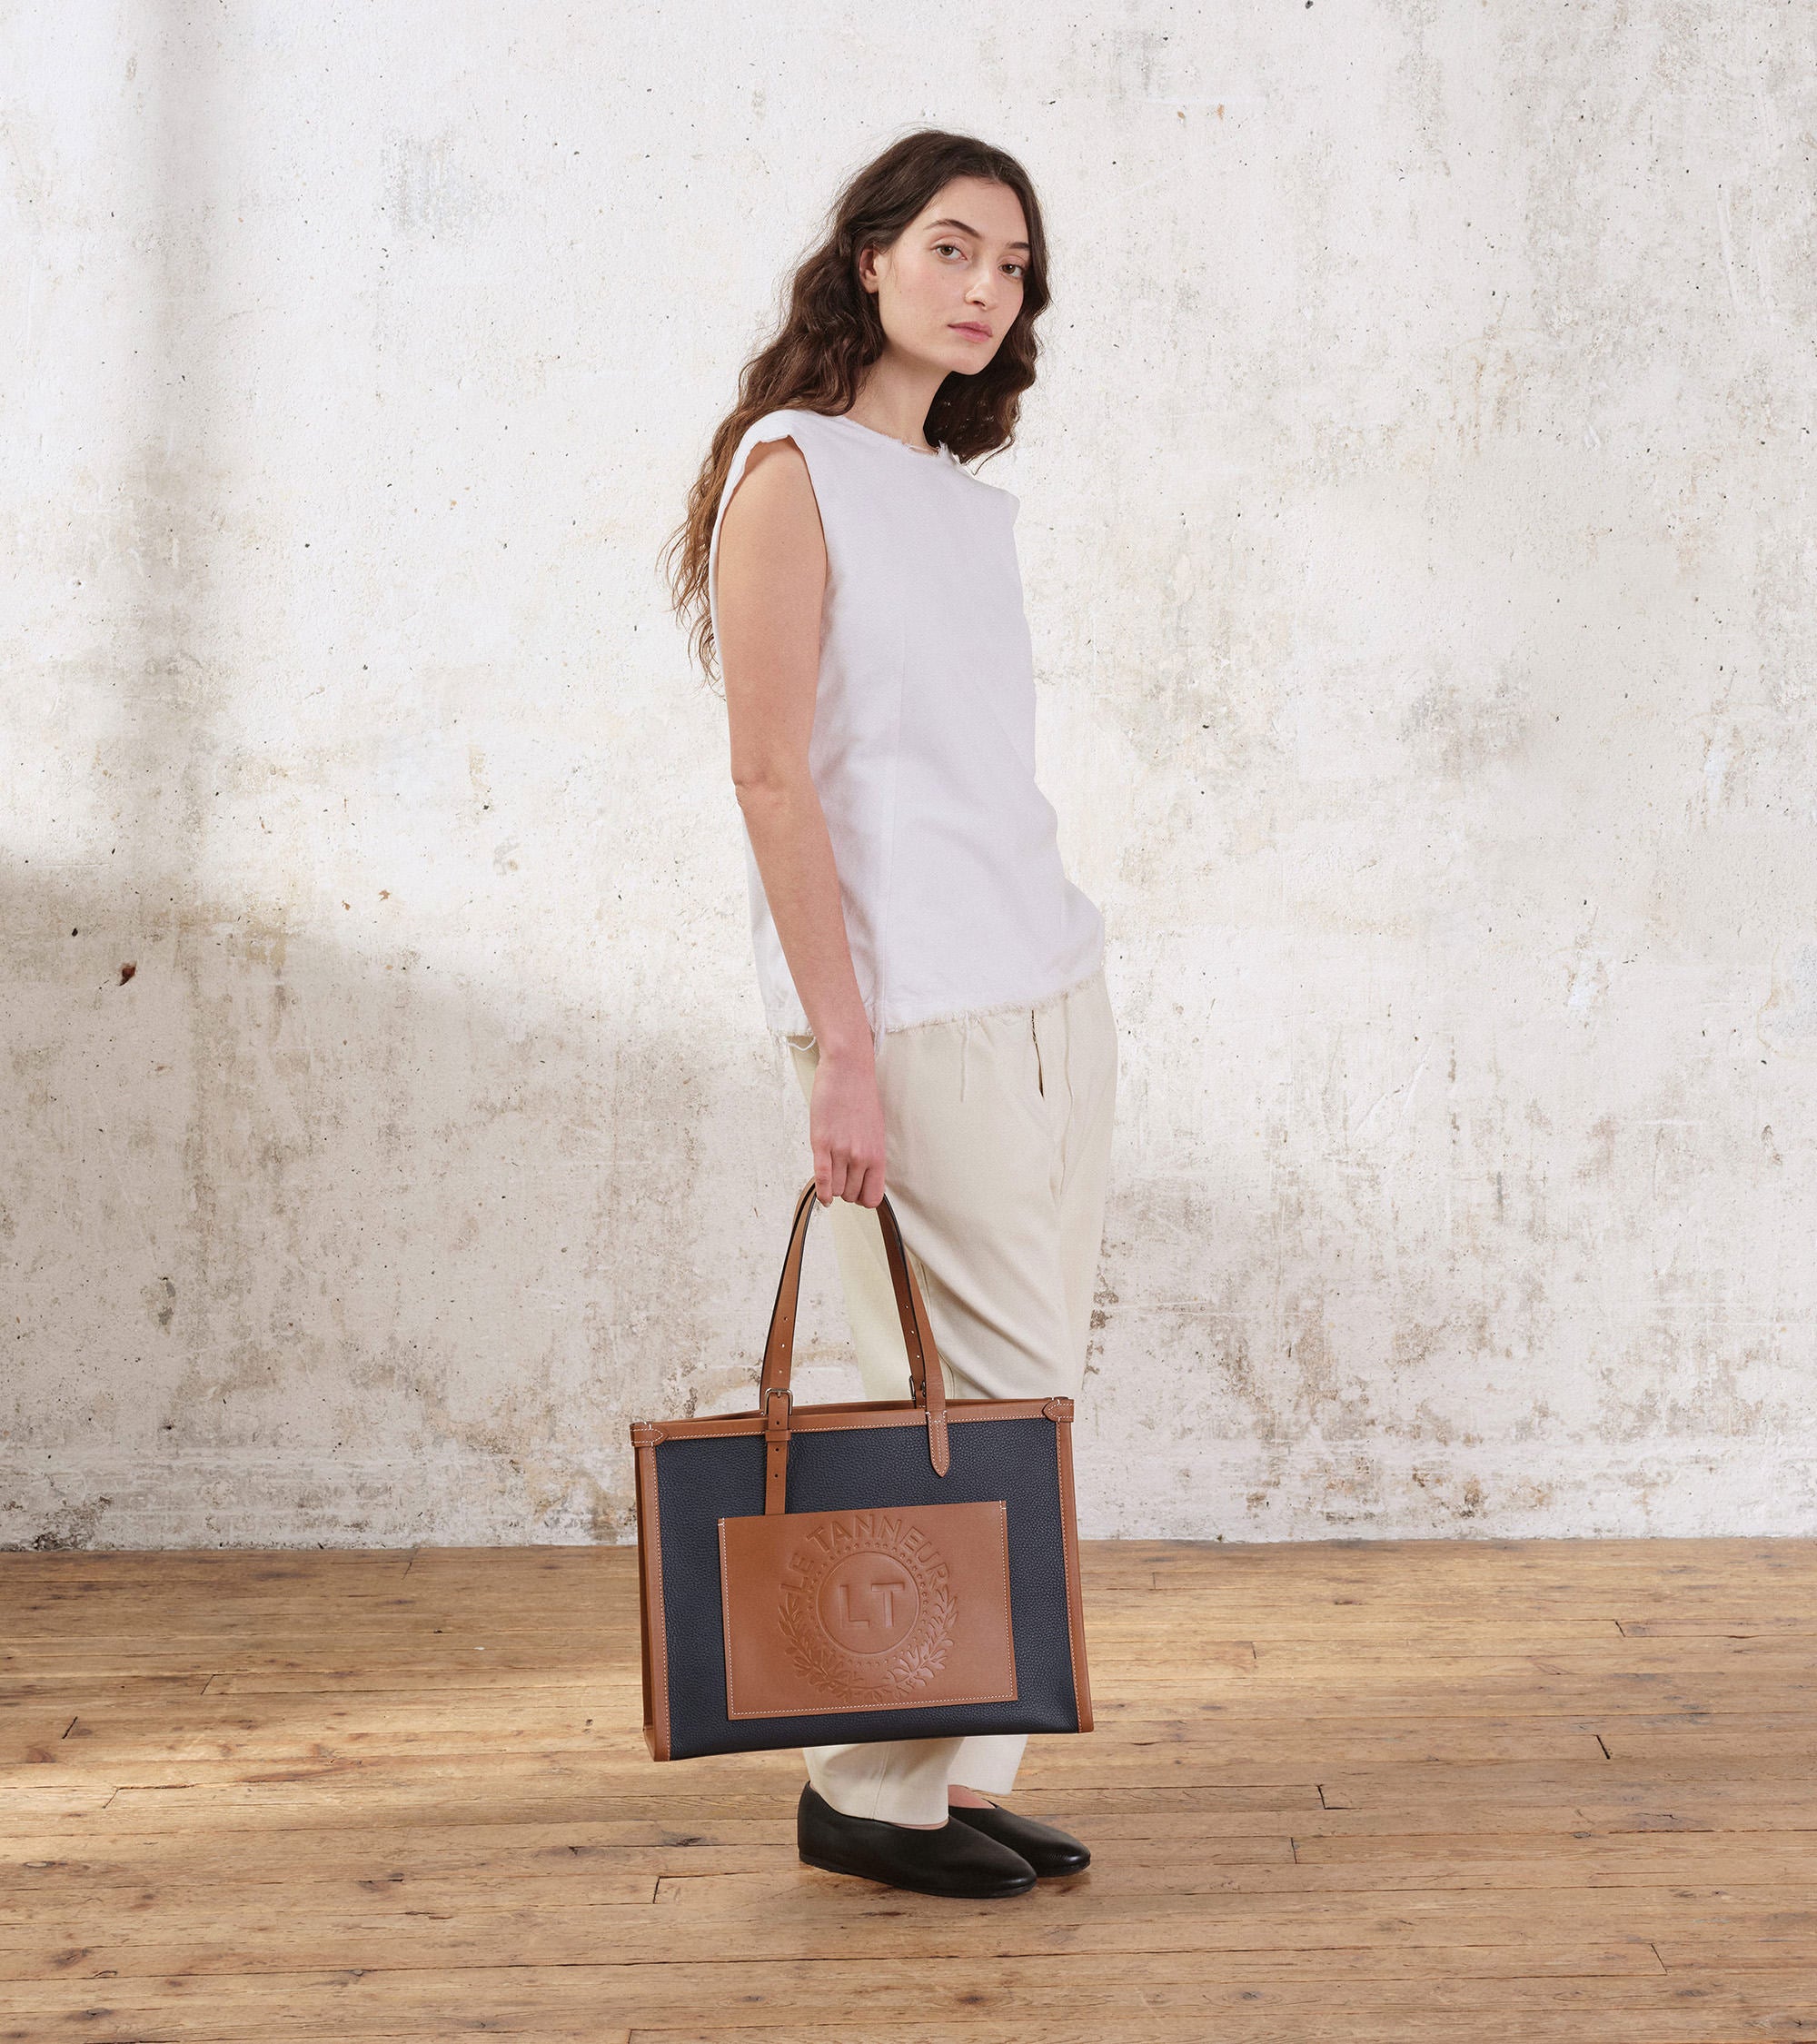 Le 125 large grained leather tote bag